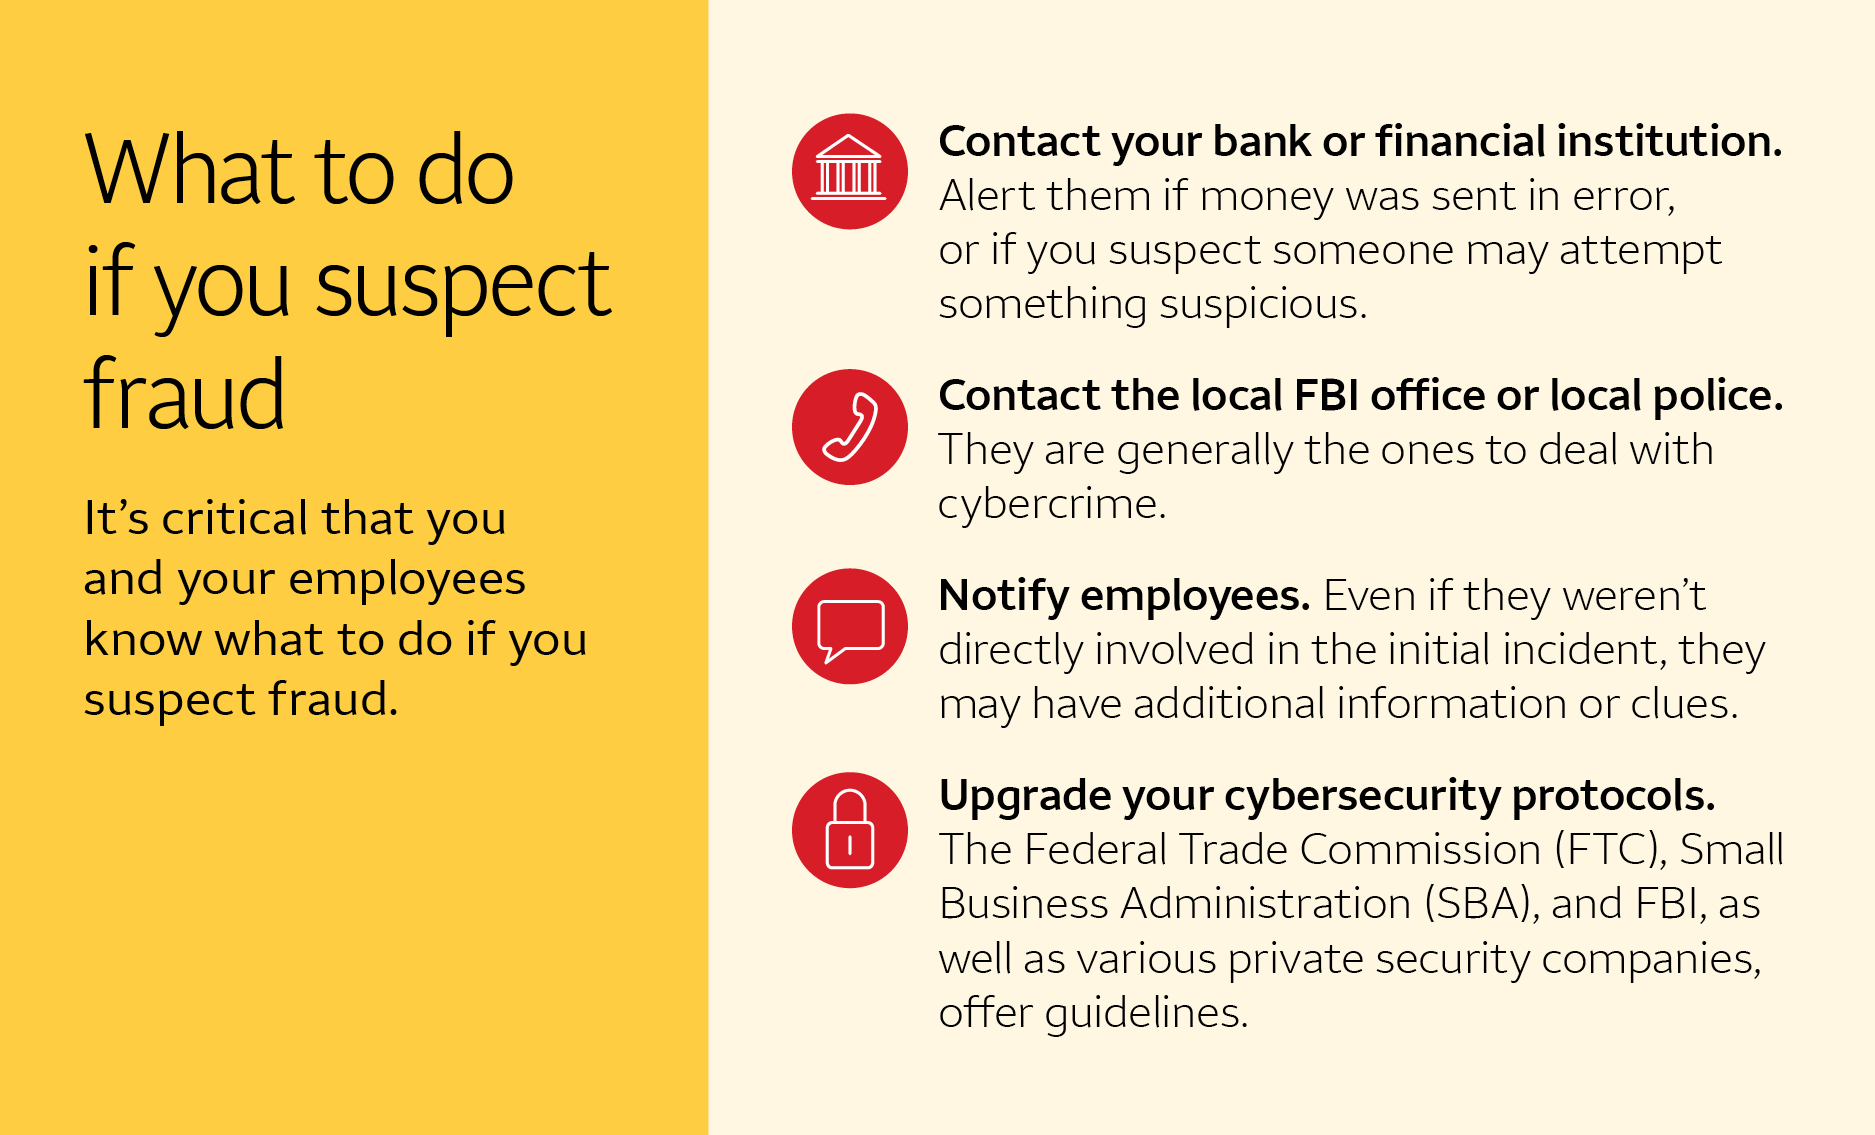 What to do if you suspect fraud